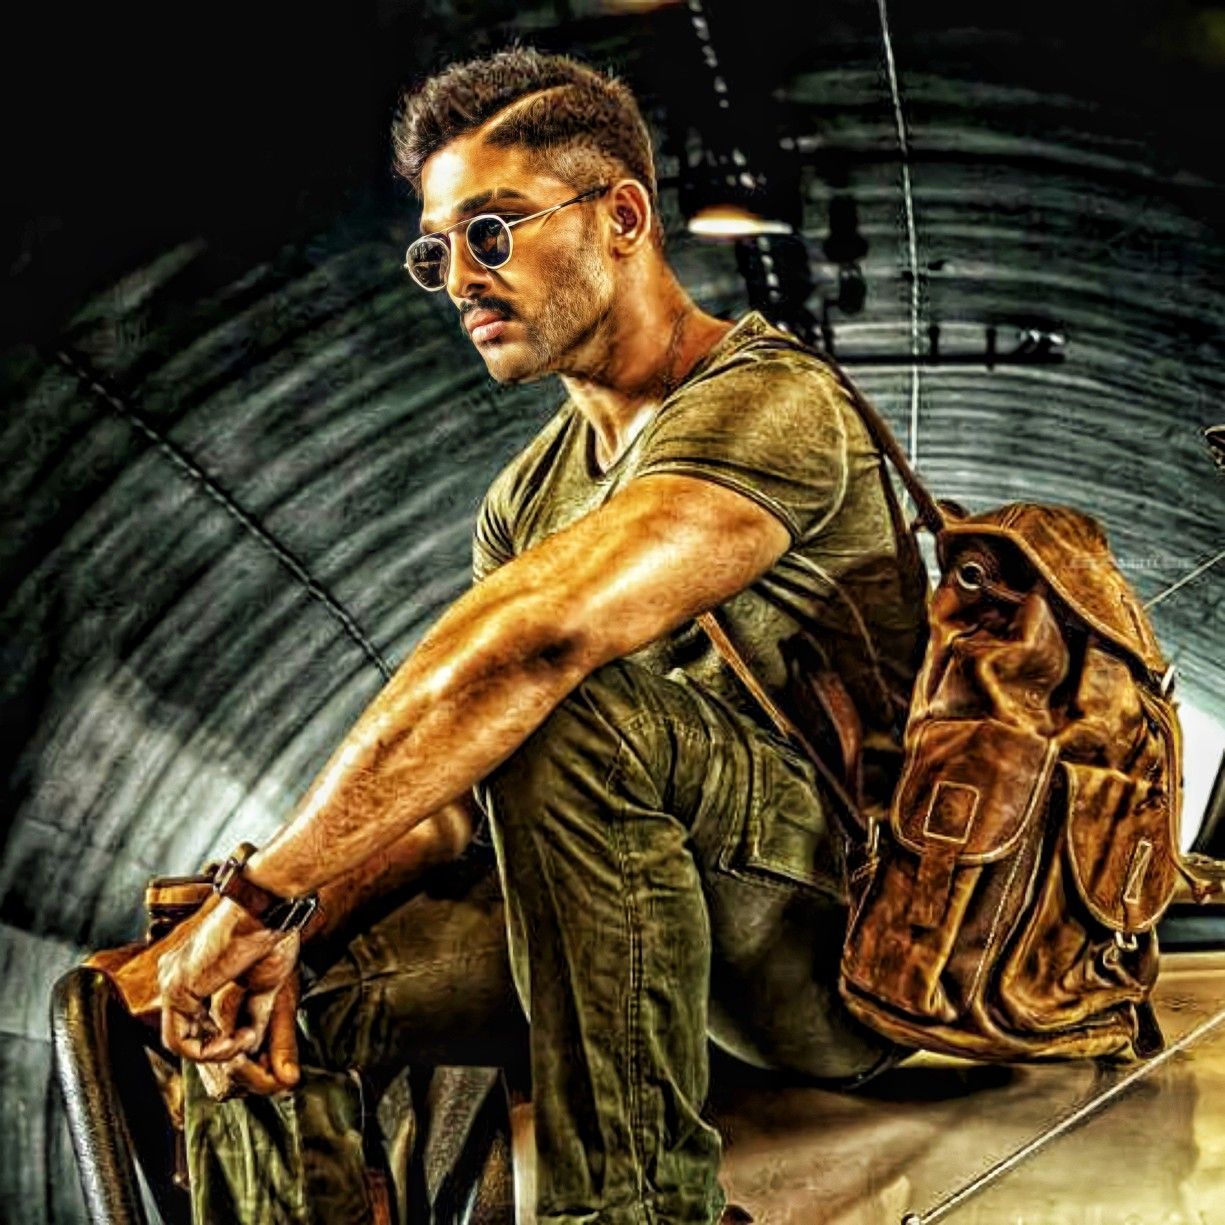 Surya The Soldier Wallpapers